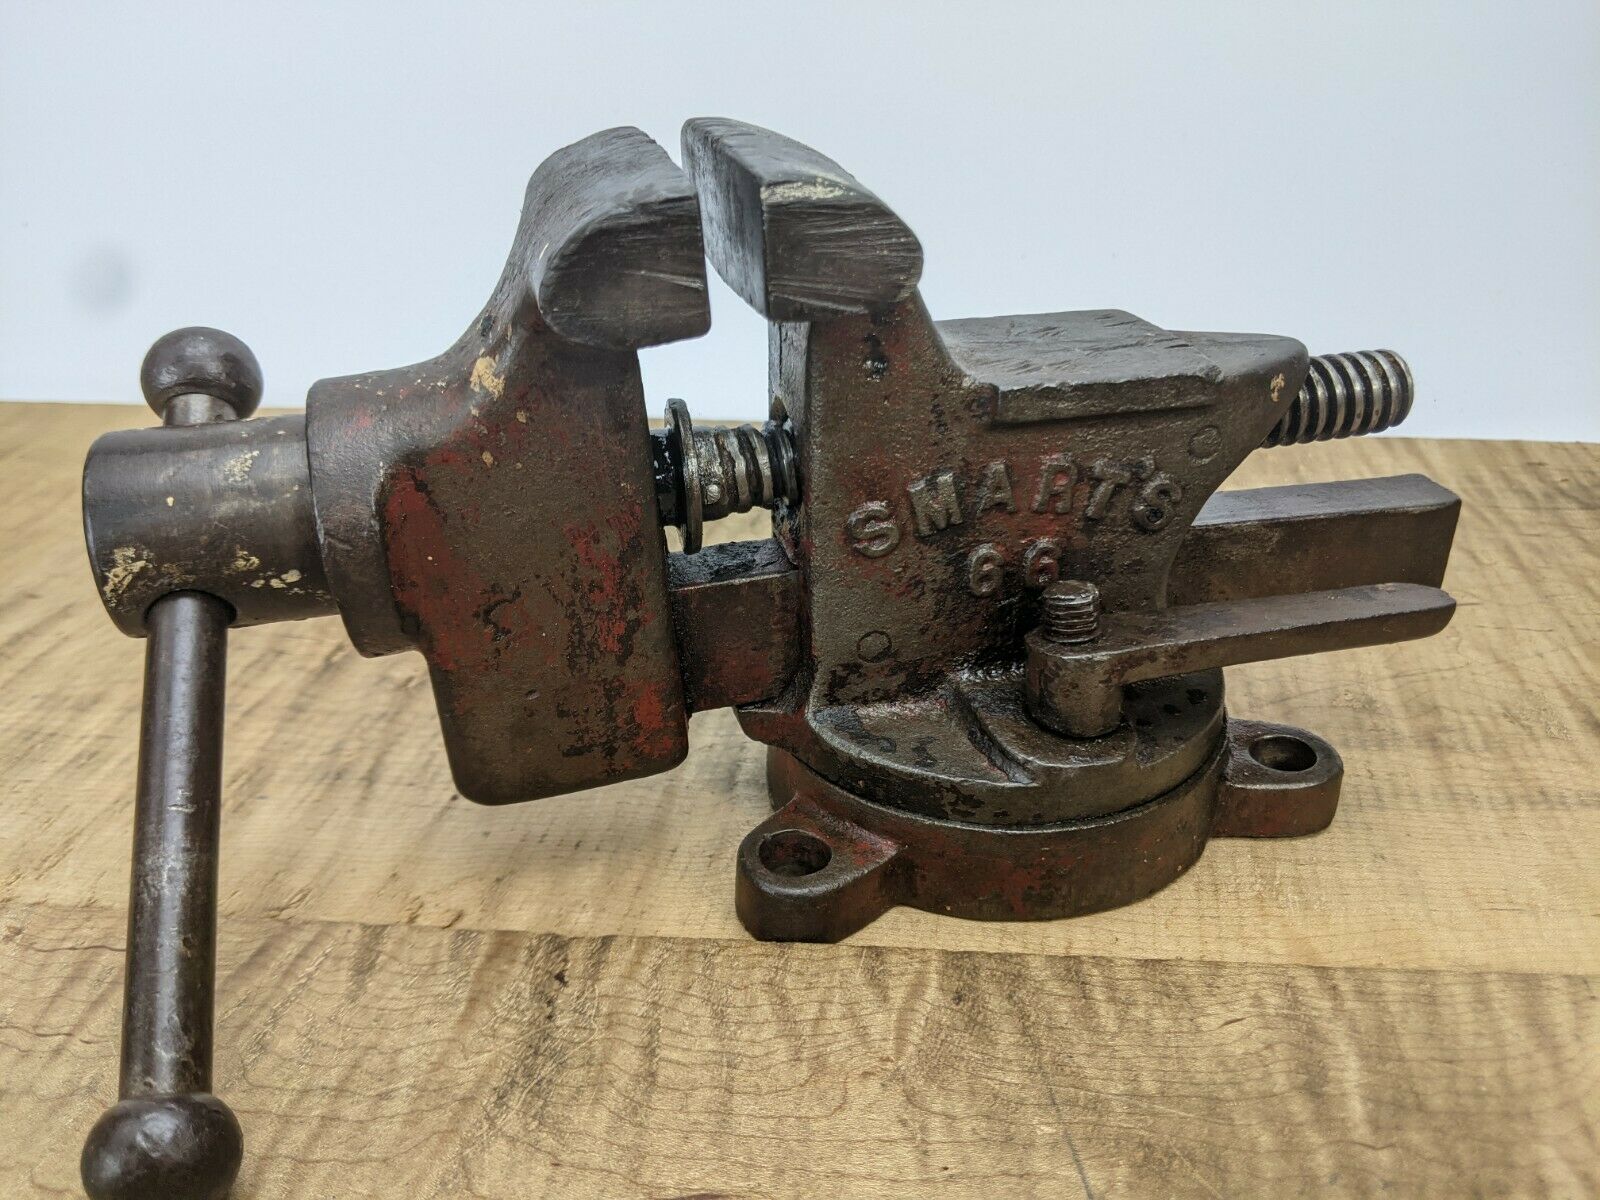 1939 Smarts 66 Swivel Bench Vise 2-1/2" Jaws Complete & Functional